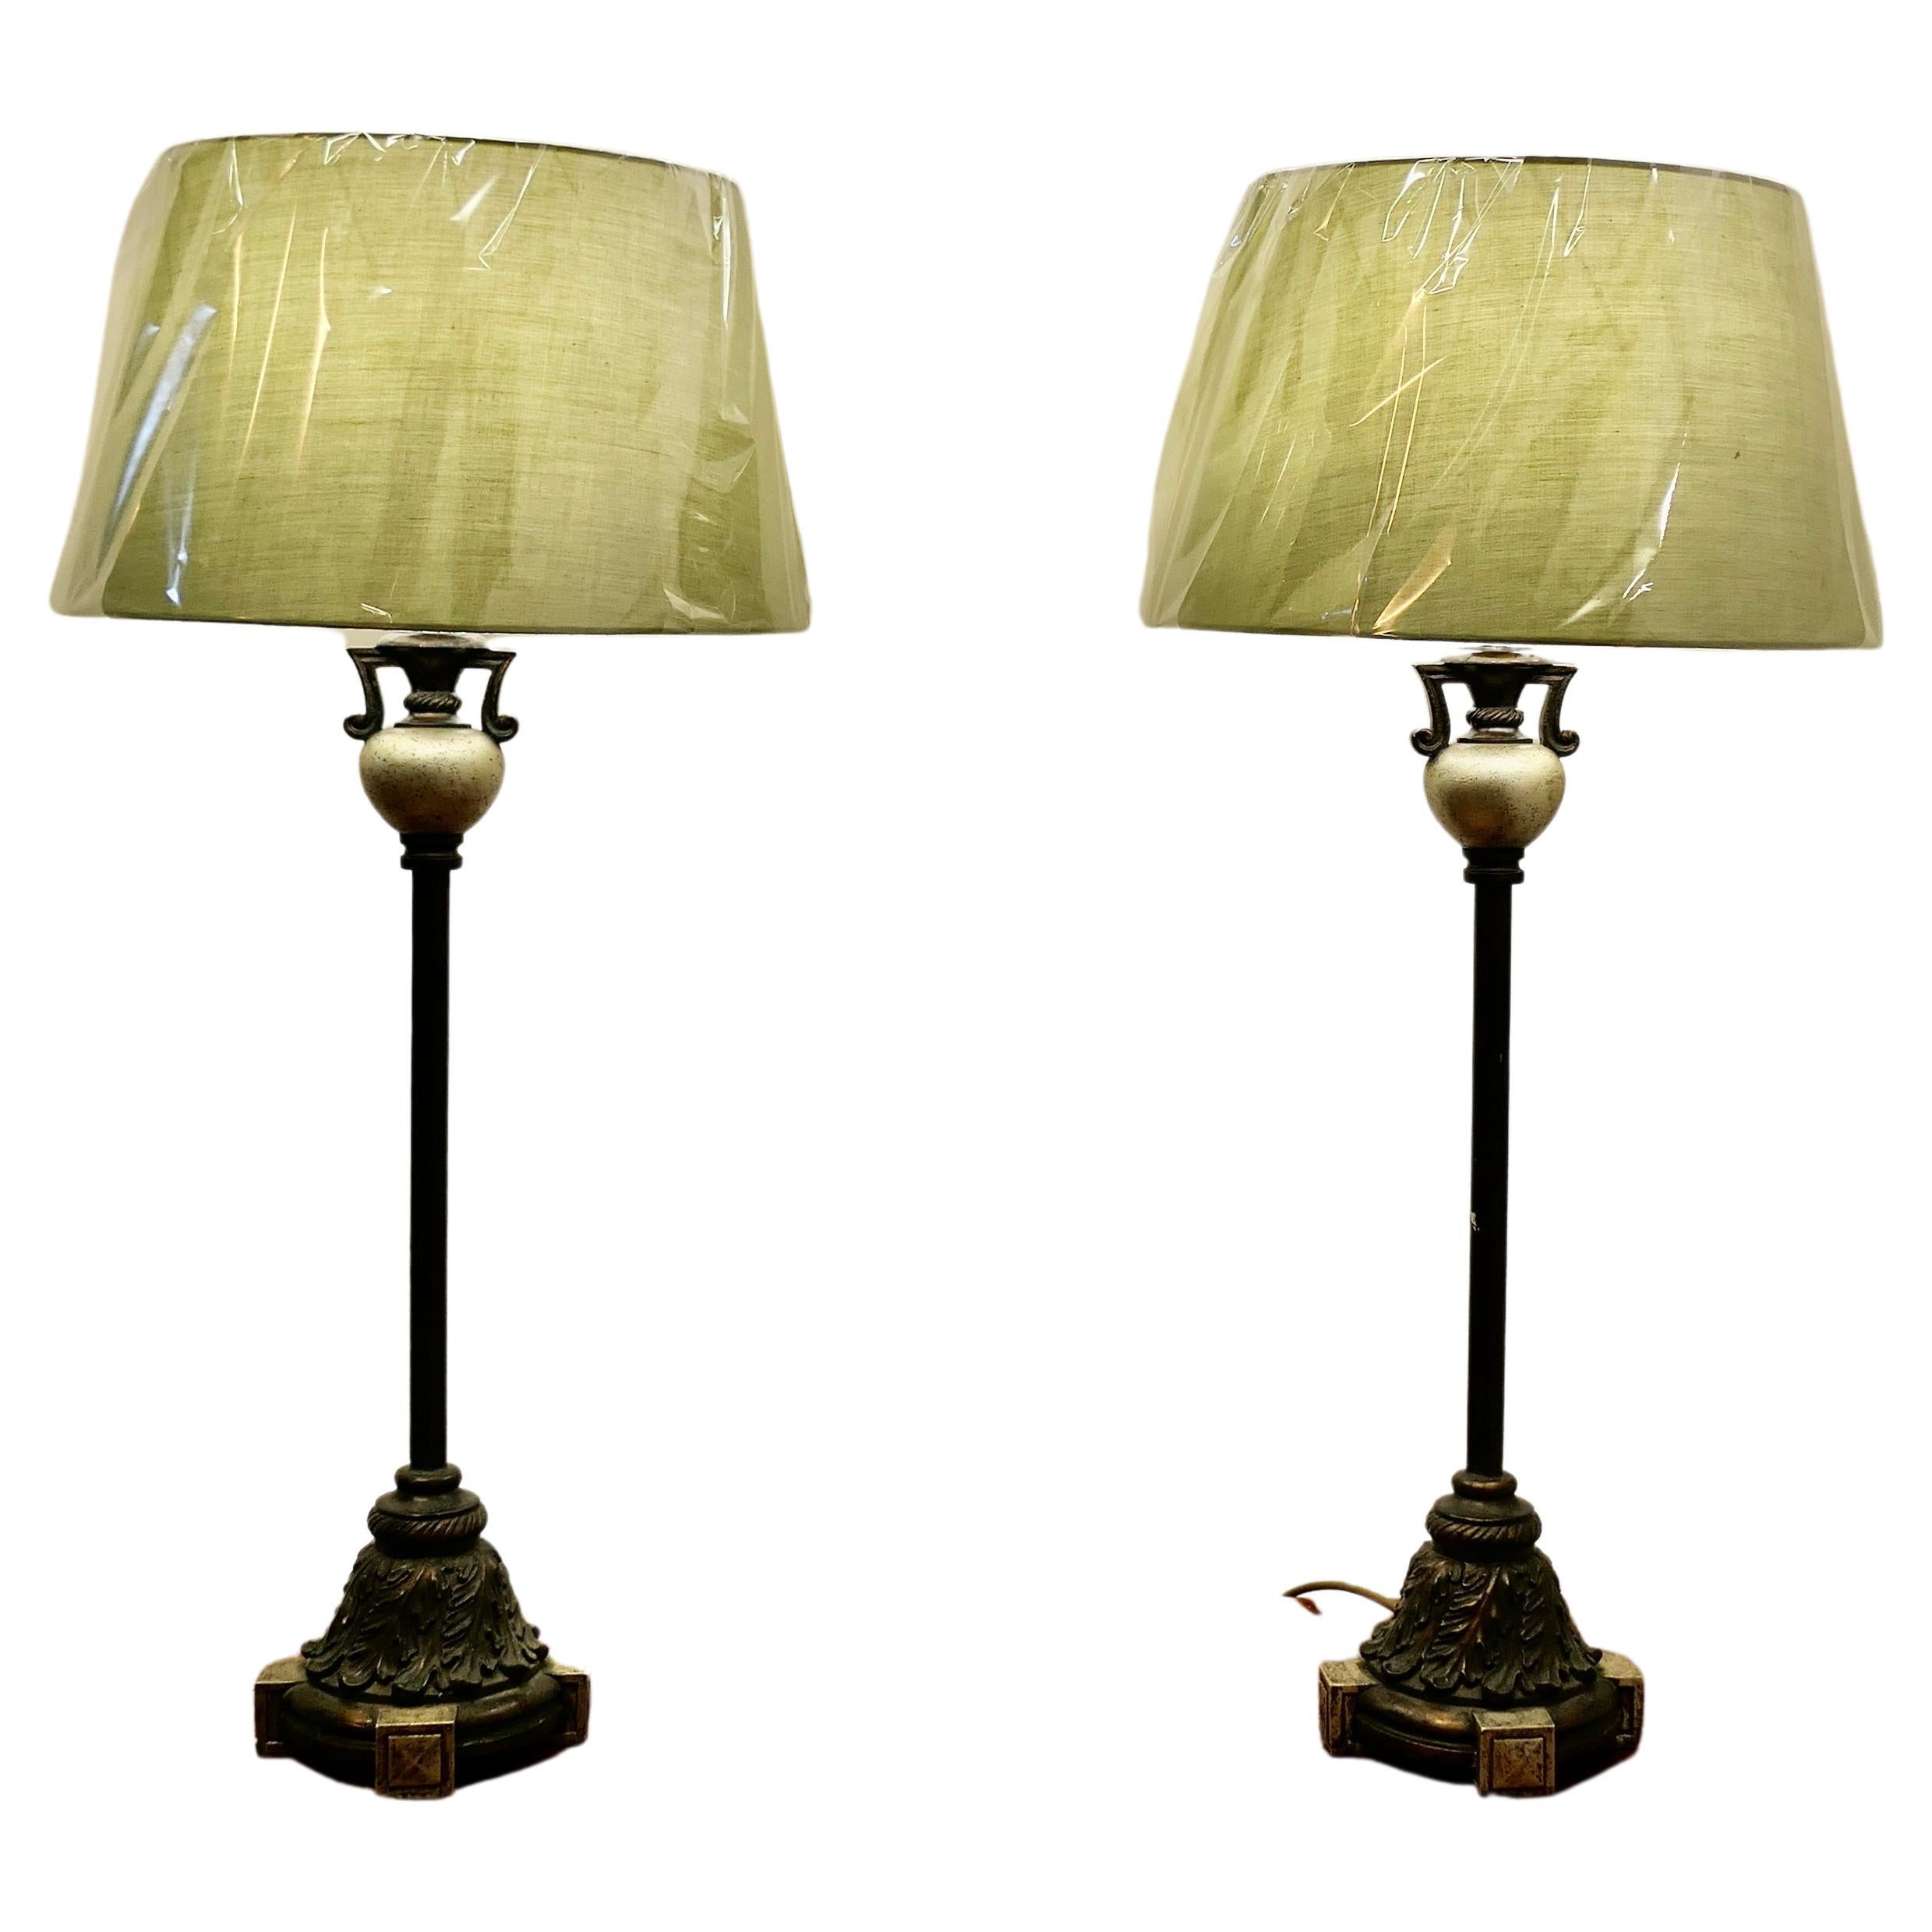 Pair of  Tall Classical Style Column Table Lamps  These are a very stylish pair  For Sale